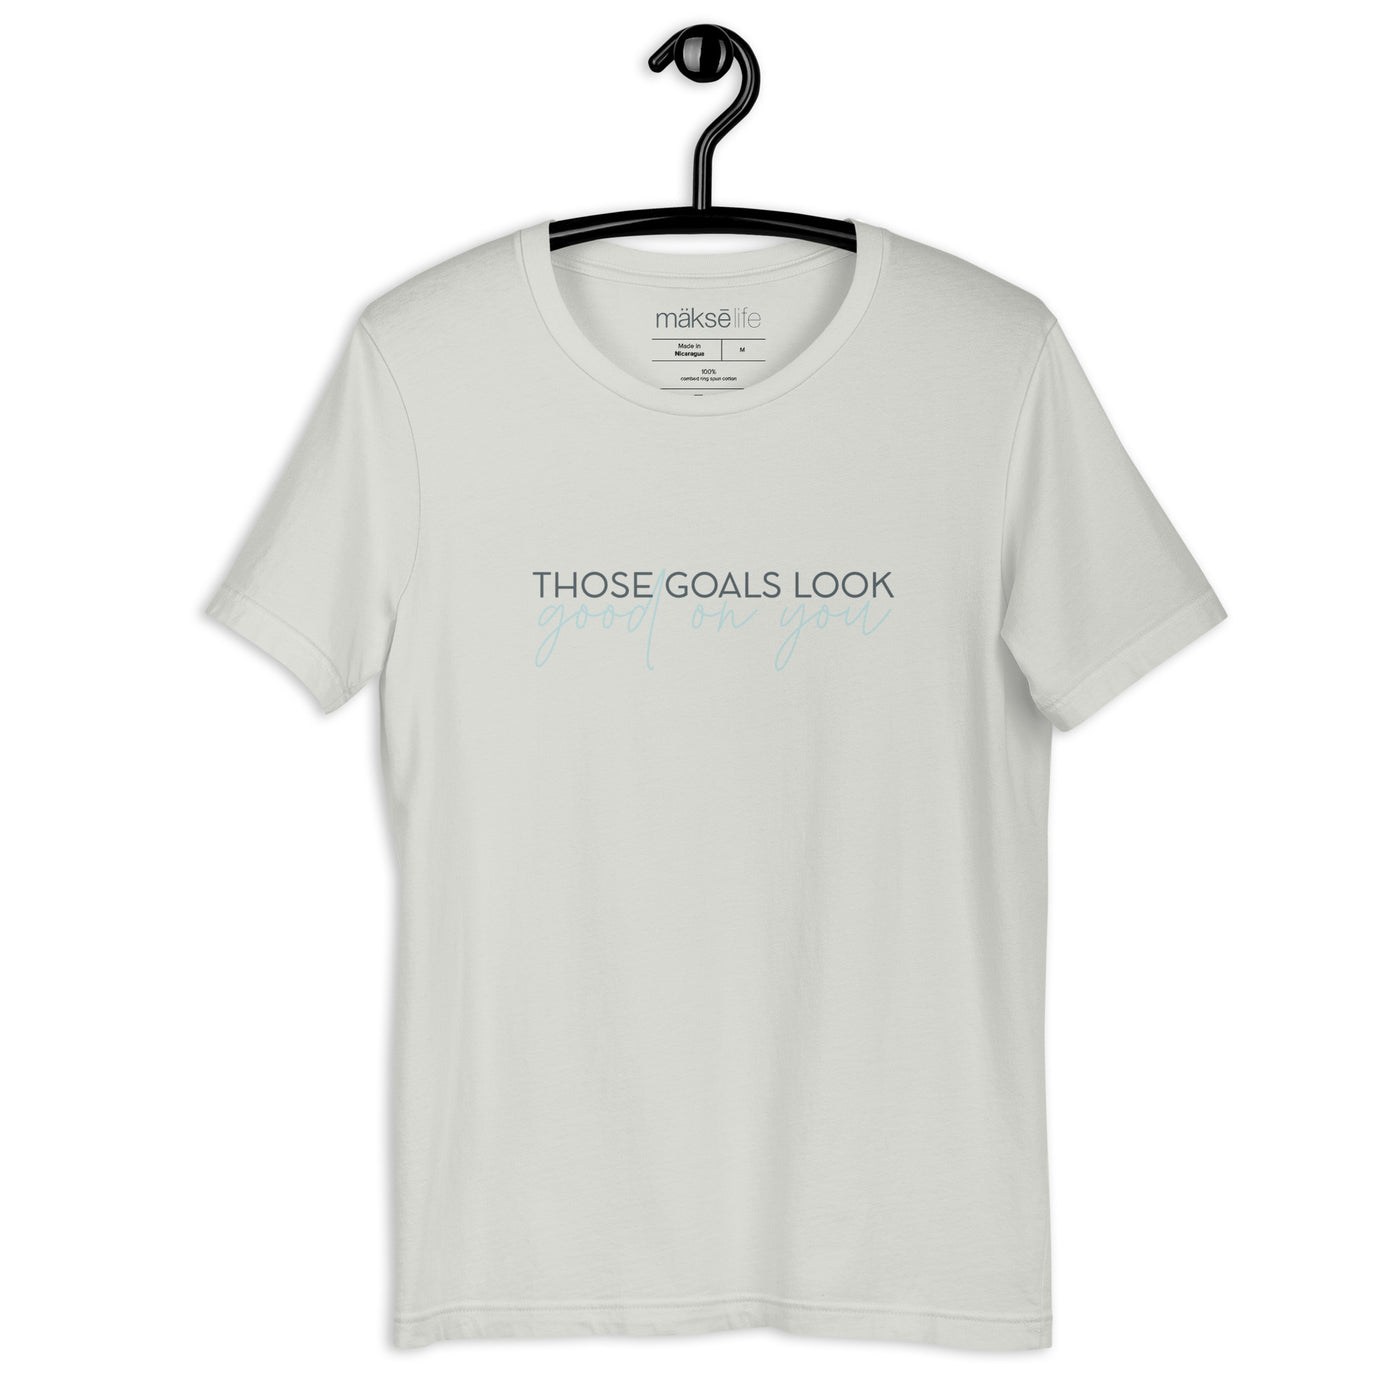 Those Goals Look Good on You T-Shirt